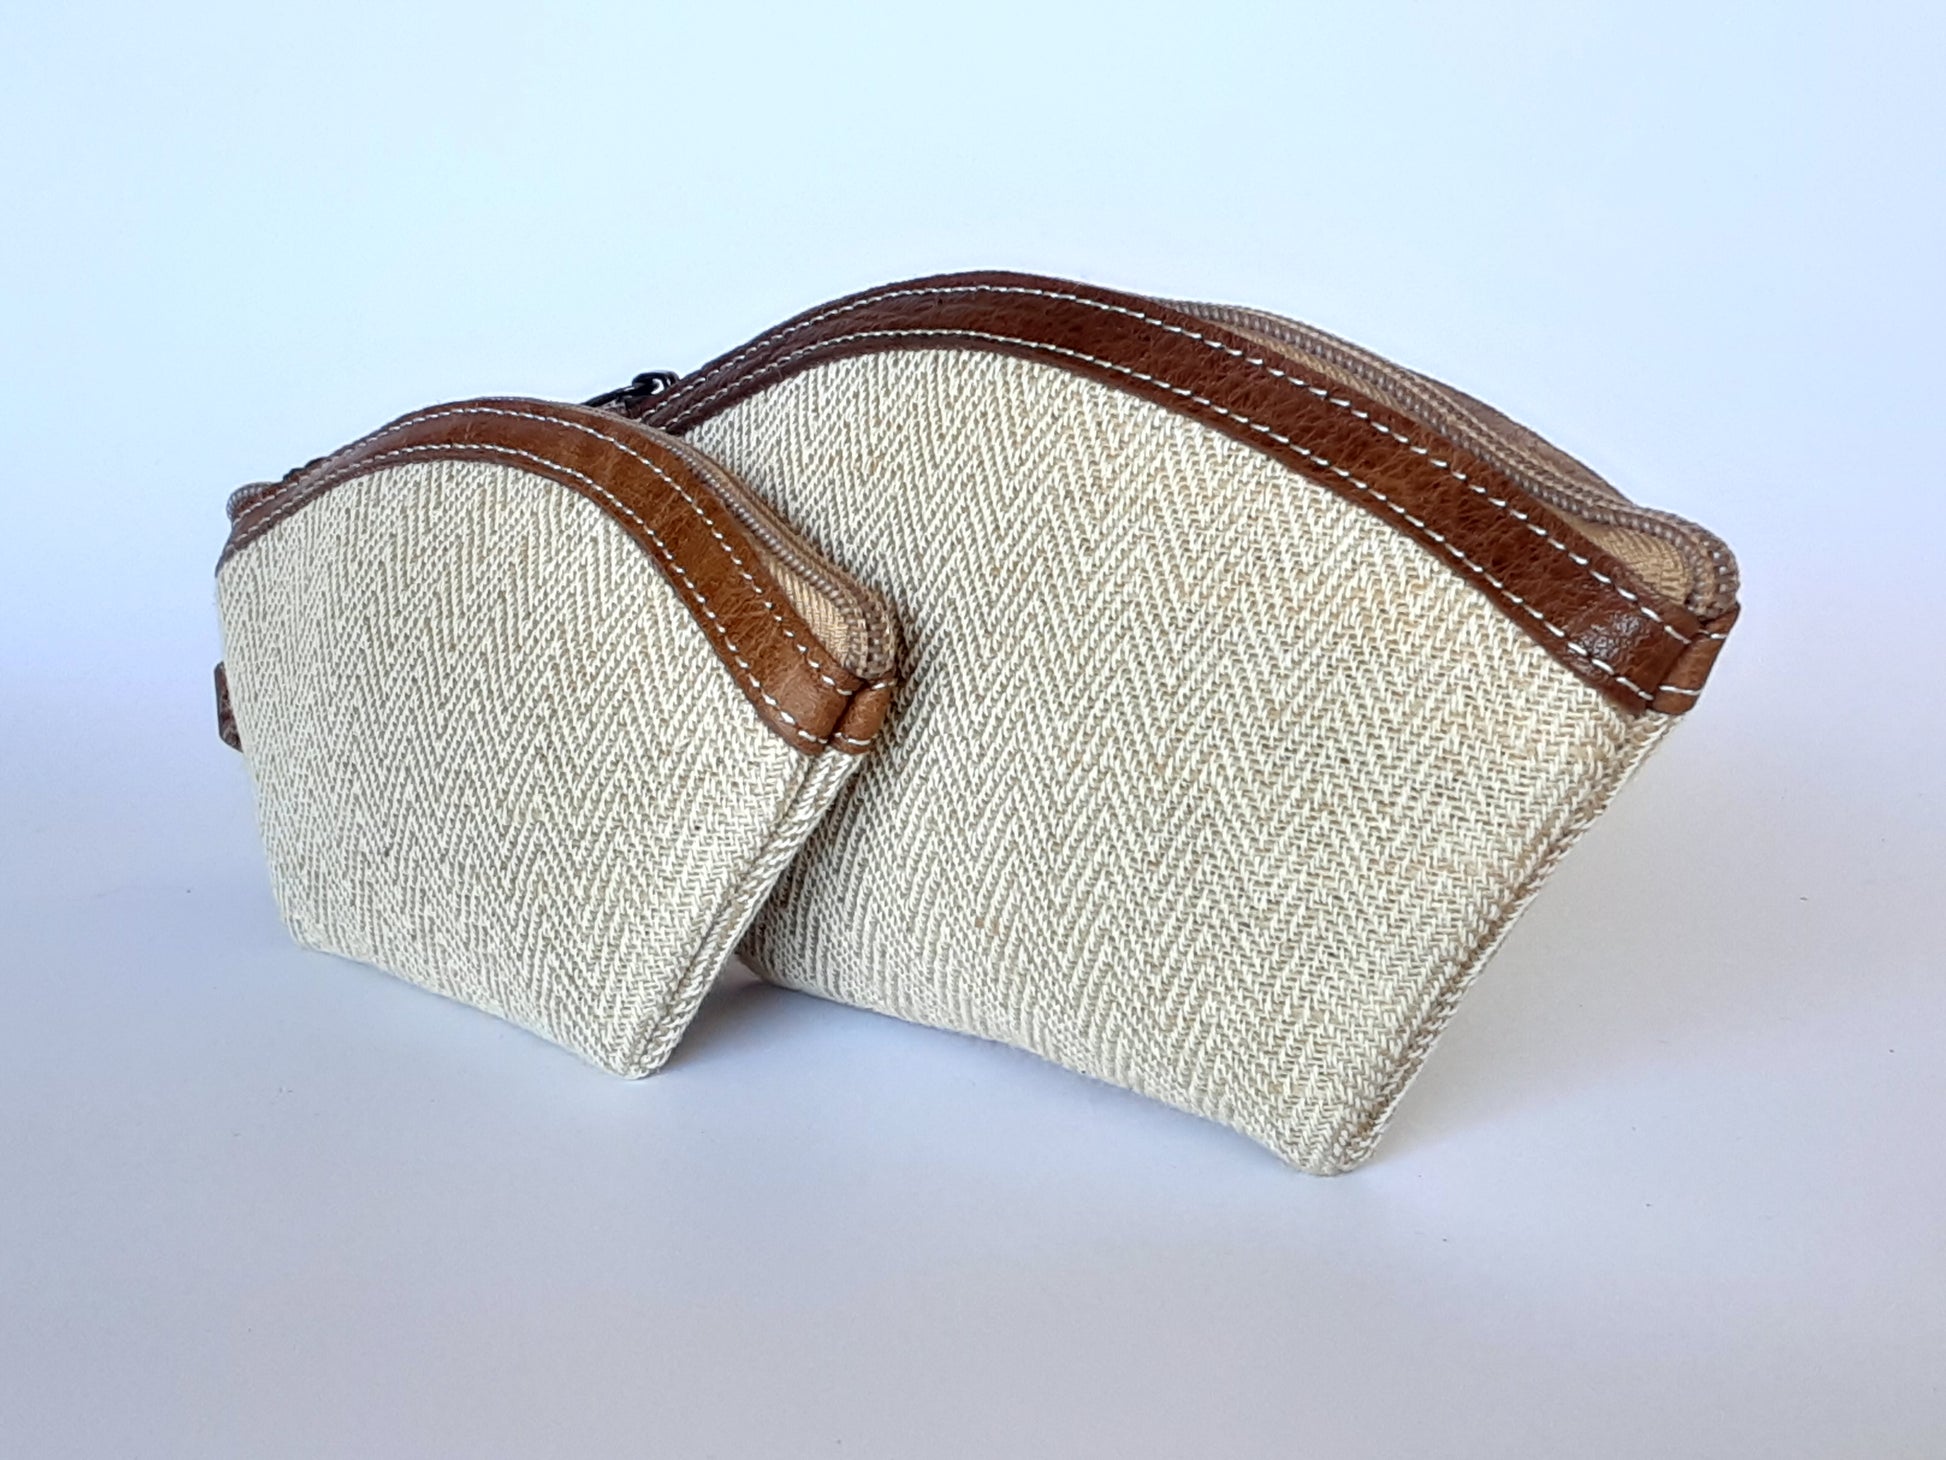 Hemp and Leather Two-Purse Set / Made in Nepal